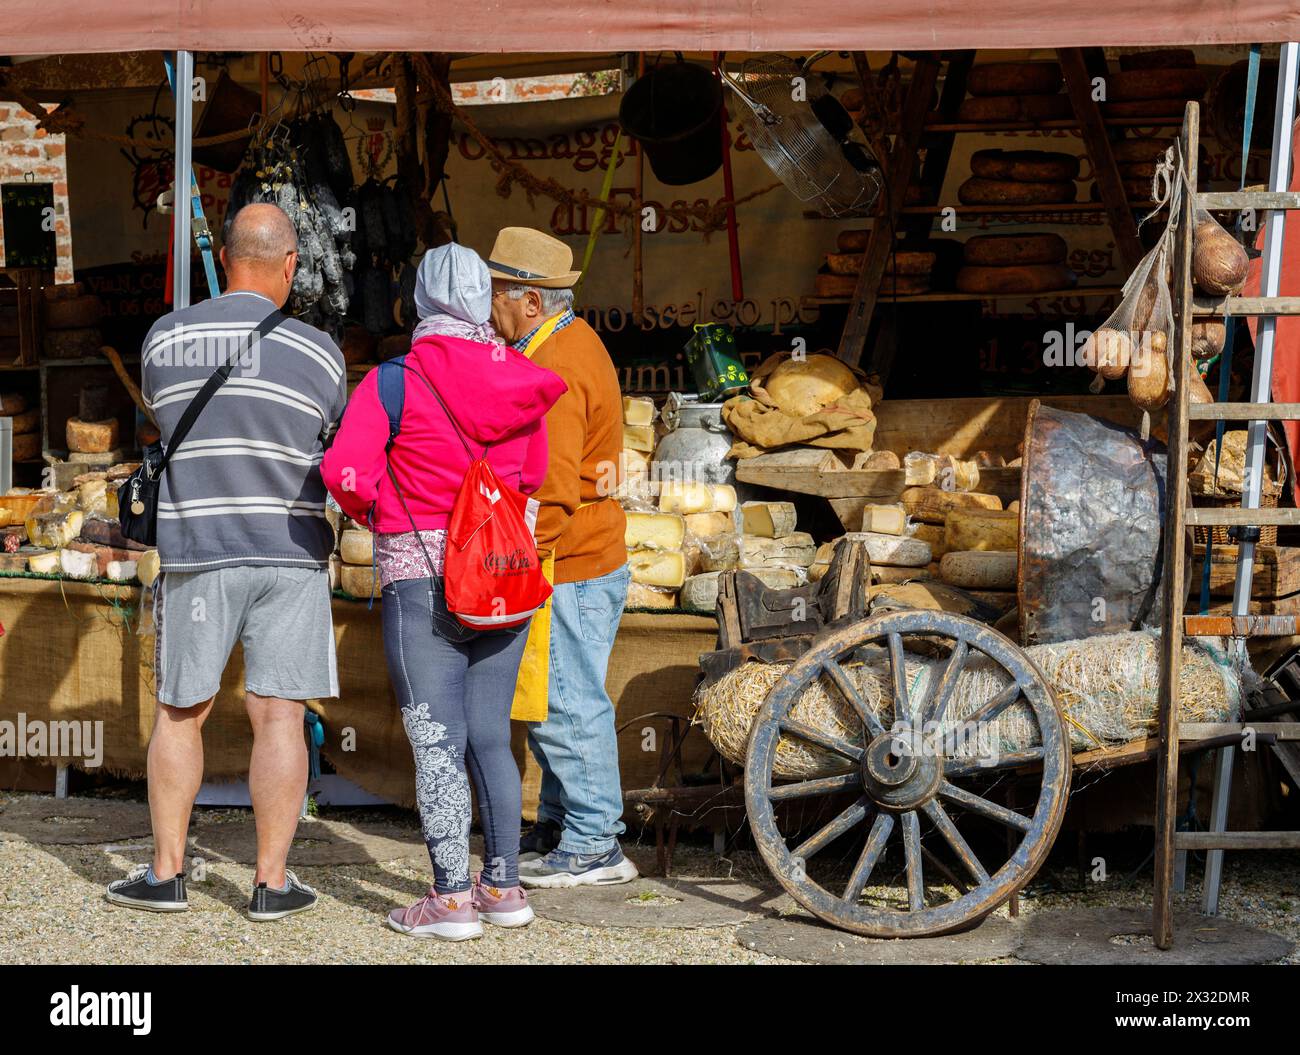 Moncalieri, Piedmont, Italy - April 20, 2024: Customers in front of a market stall selling artisanal cheeses and cured meats. Stock Photo